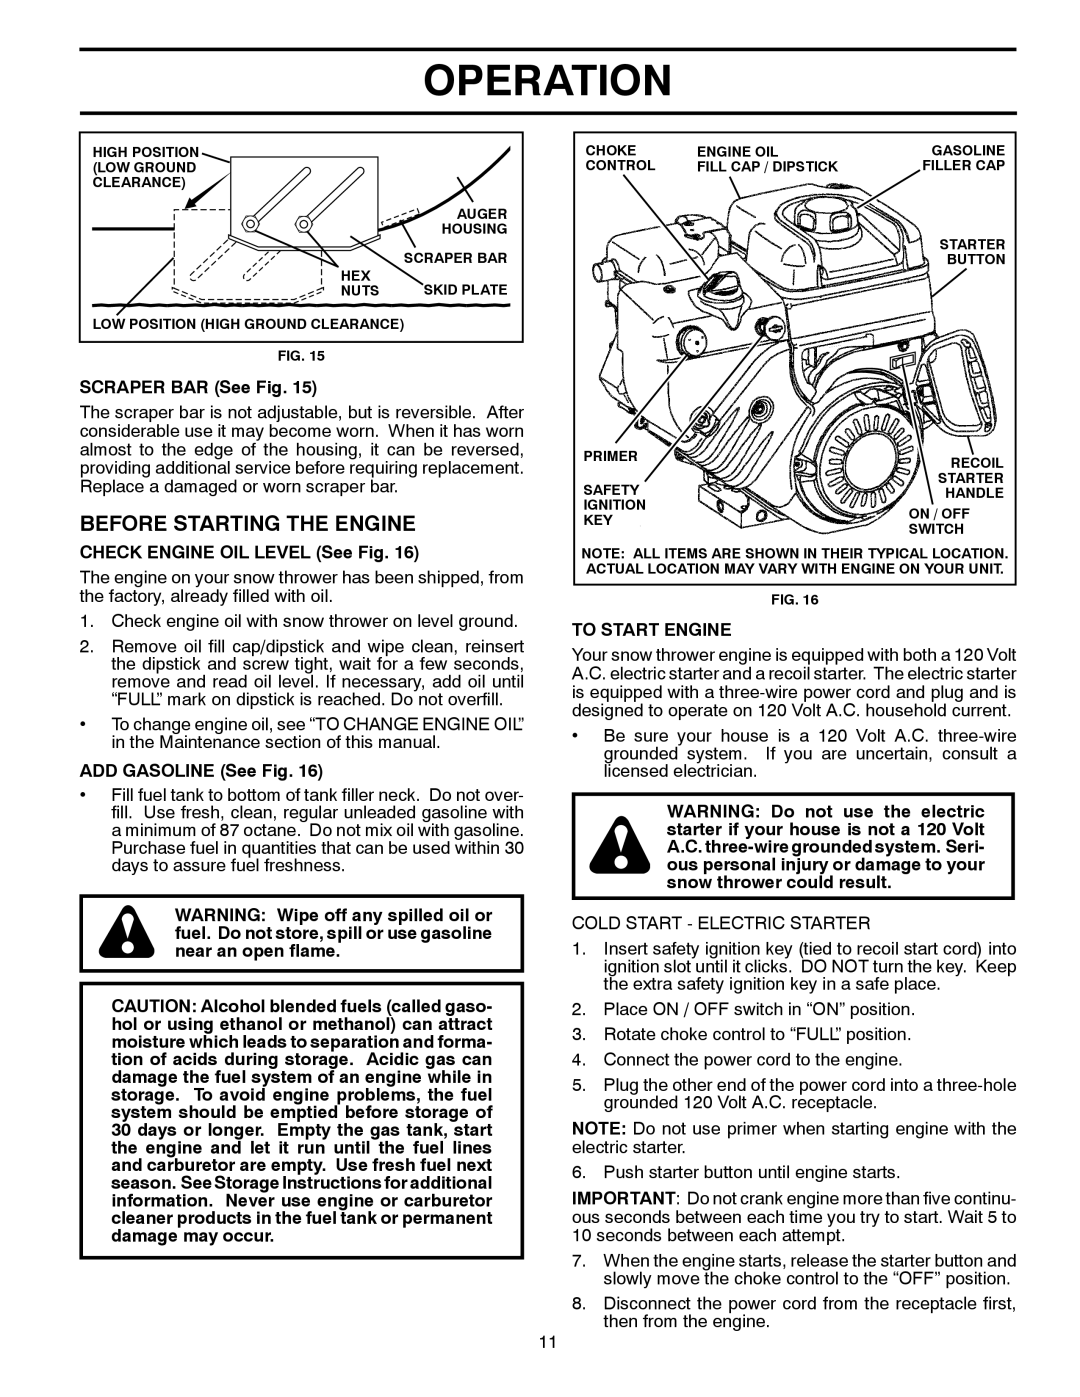 Poulan XT827ES Before Starting The Engine, Operation, SCRAPER BAR See Fig, CHECK ENGINE OIL LEVEL See Fig, To Start Engine 